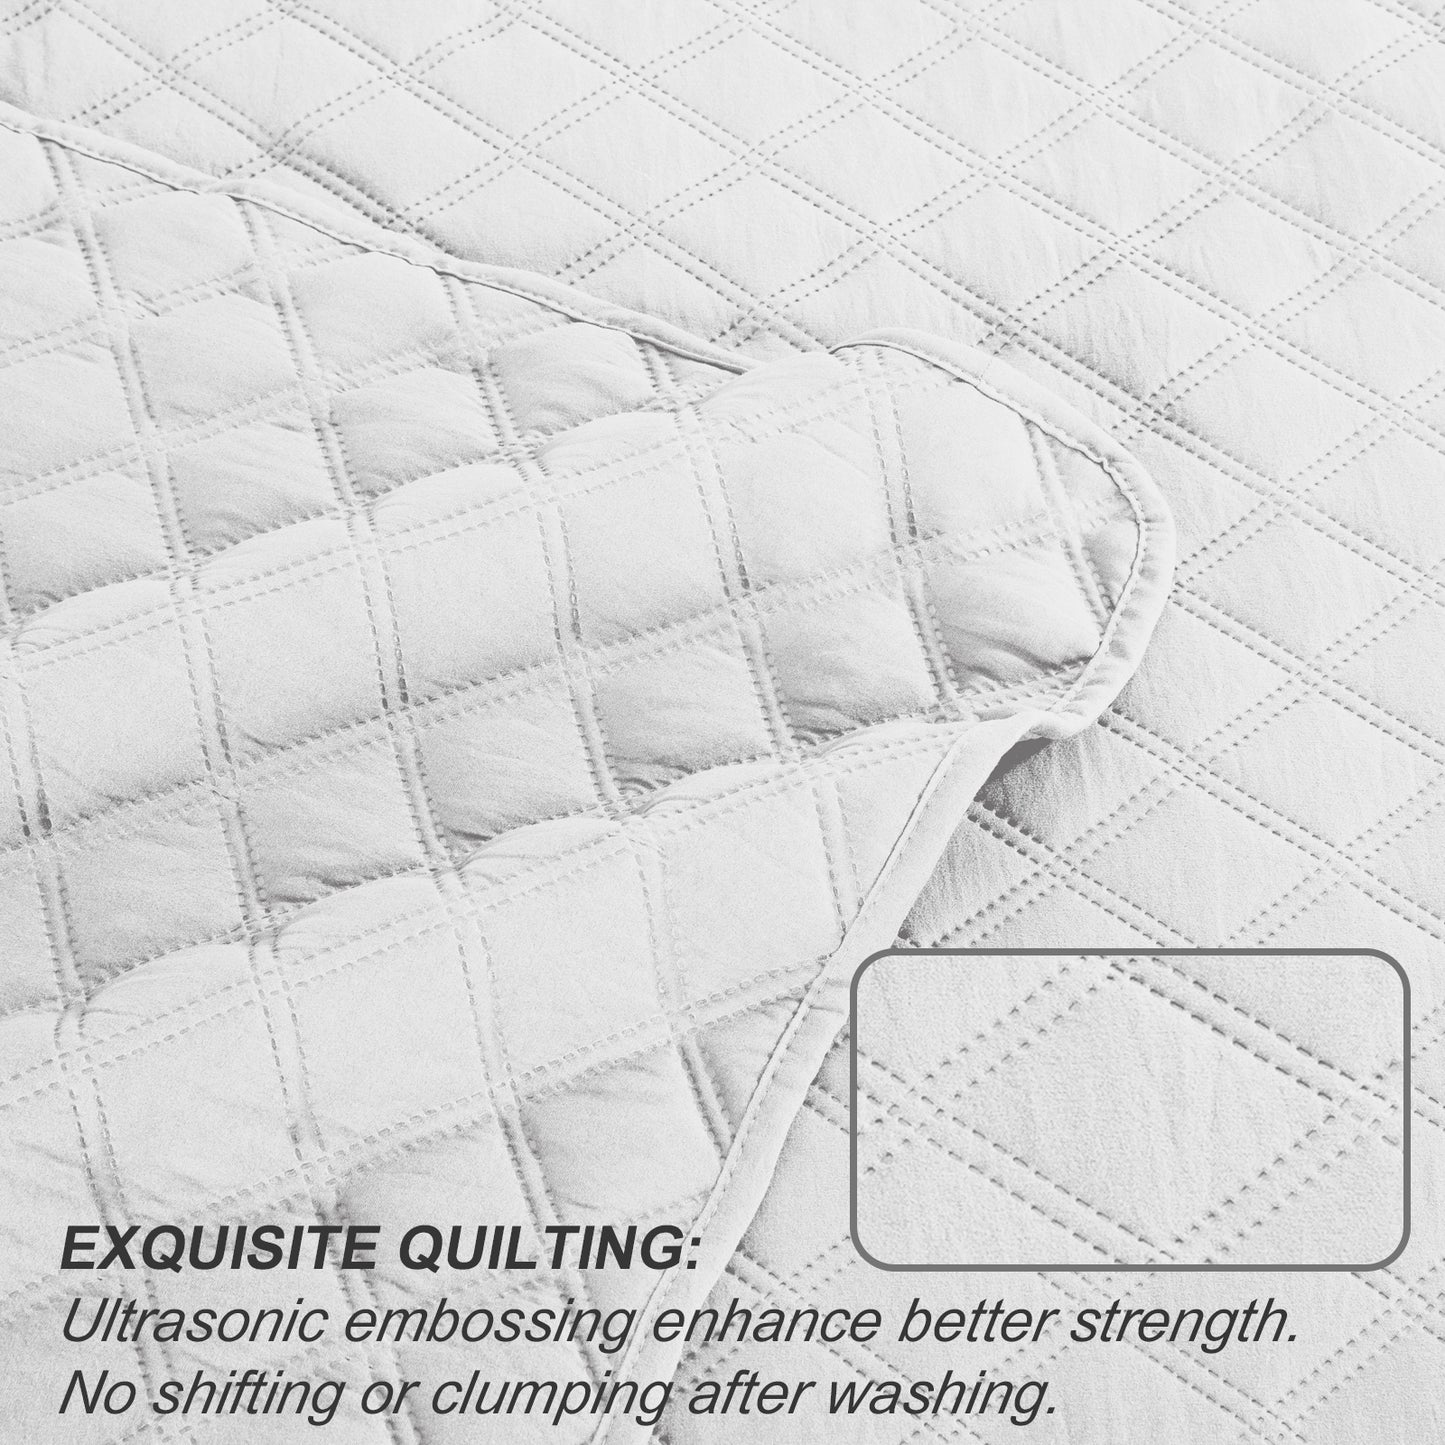 Exclusivo Mezcla 2-Piece White Twin Size Quilt Set, Box Pattern Ultrasonic Lightweight and Soft Quilts/Bedspreads/Coverlets/Bedding Set (1 Quilt, 1 Pillow Sham) for All Seasons